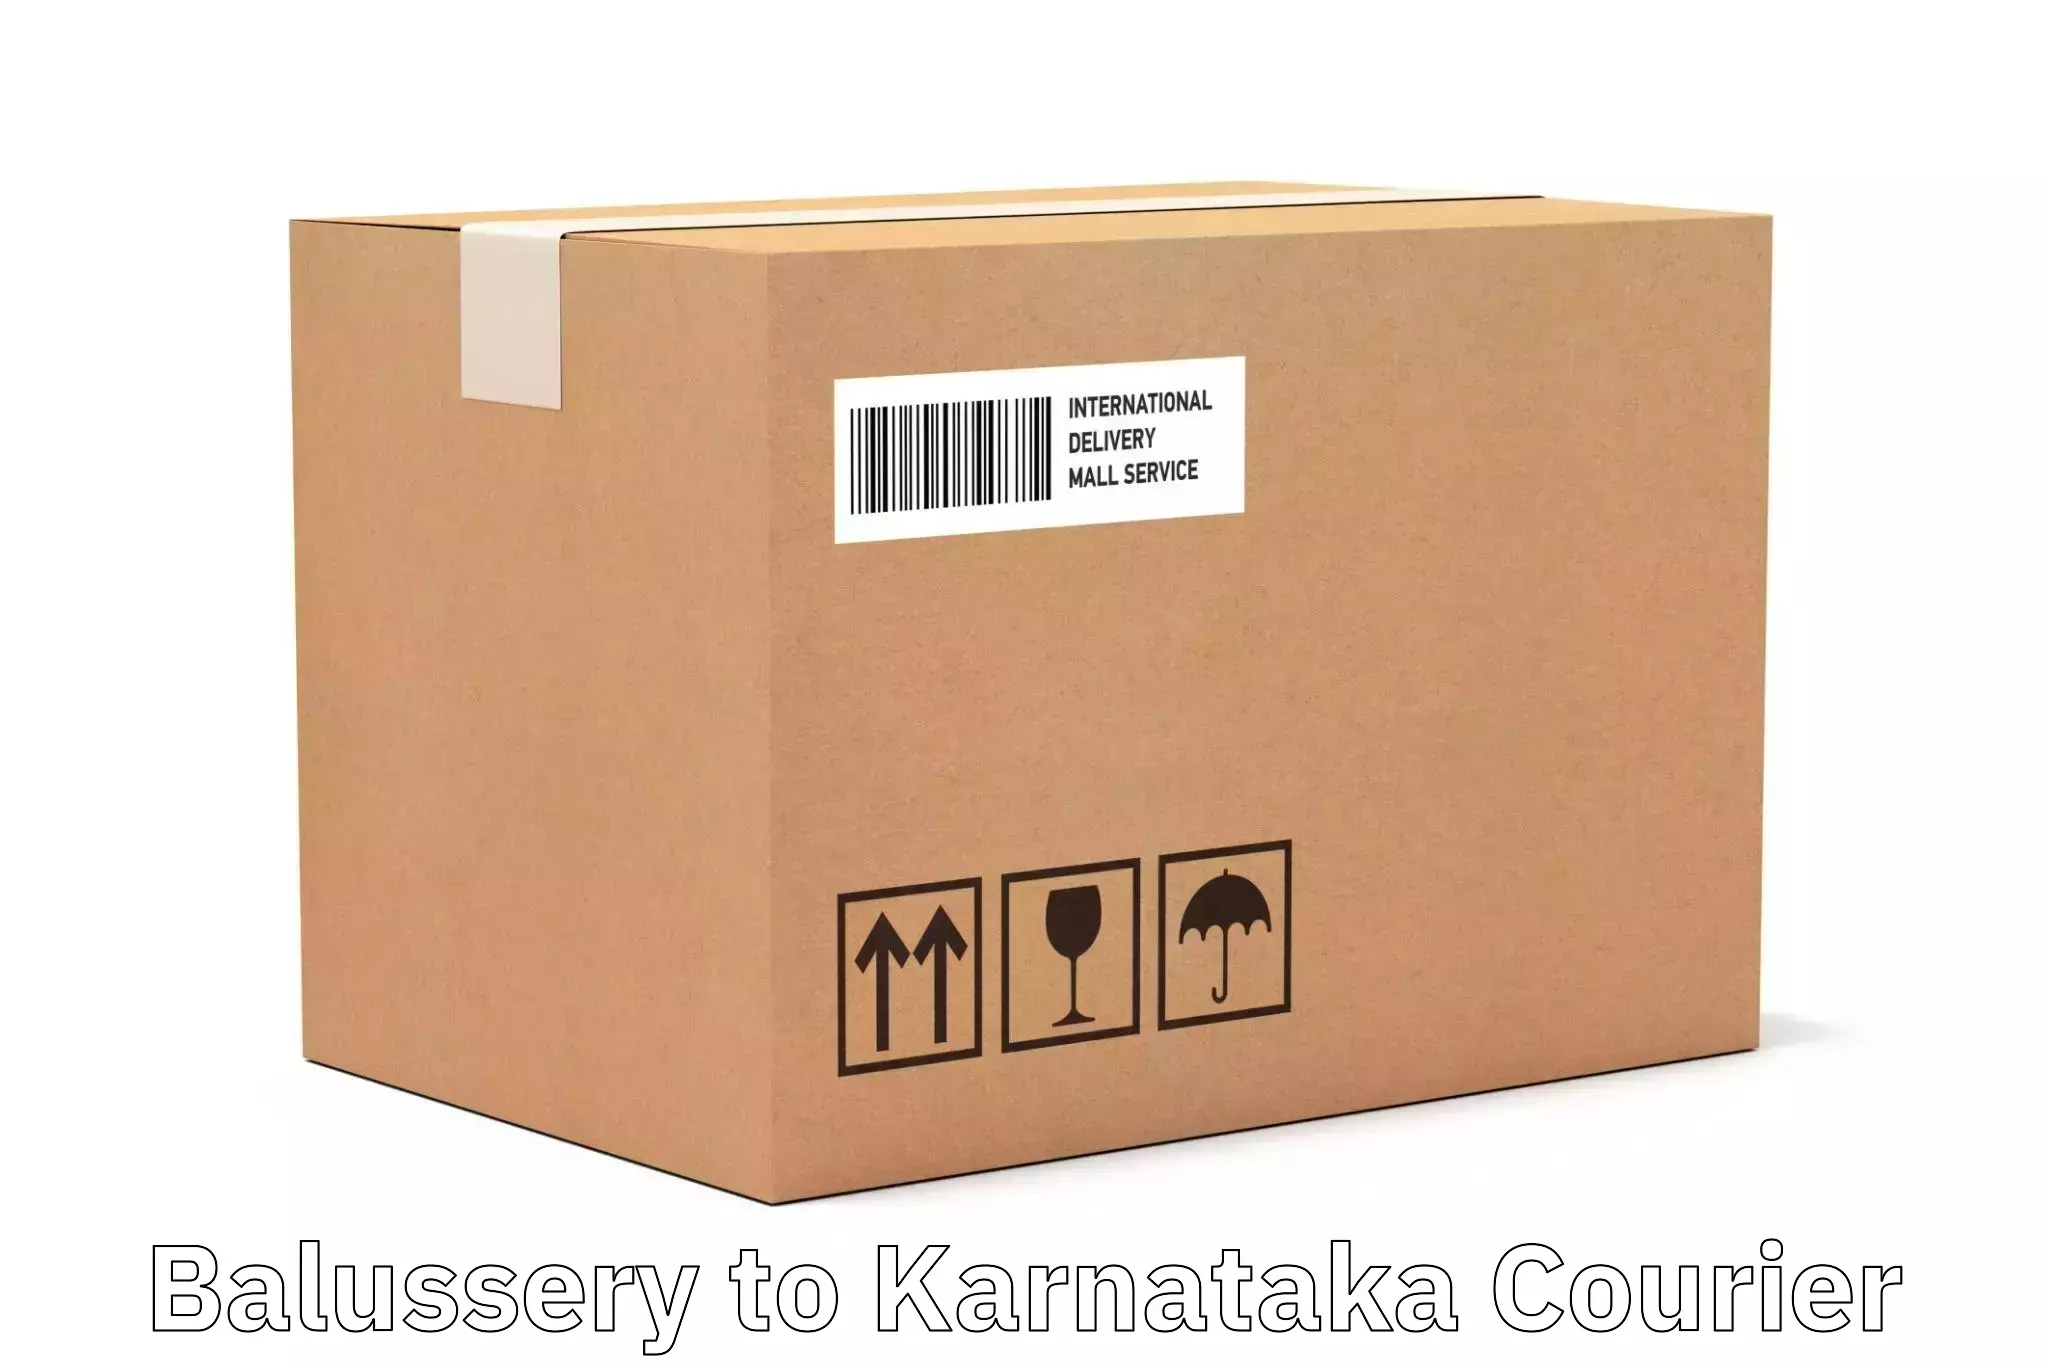 Same-day delivery options in Balussery to Karnataka